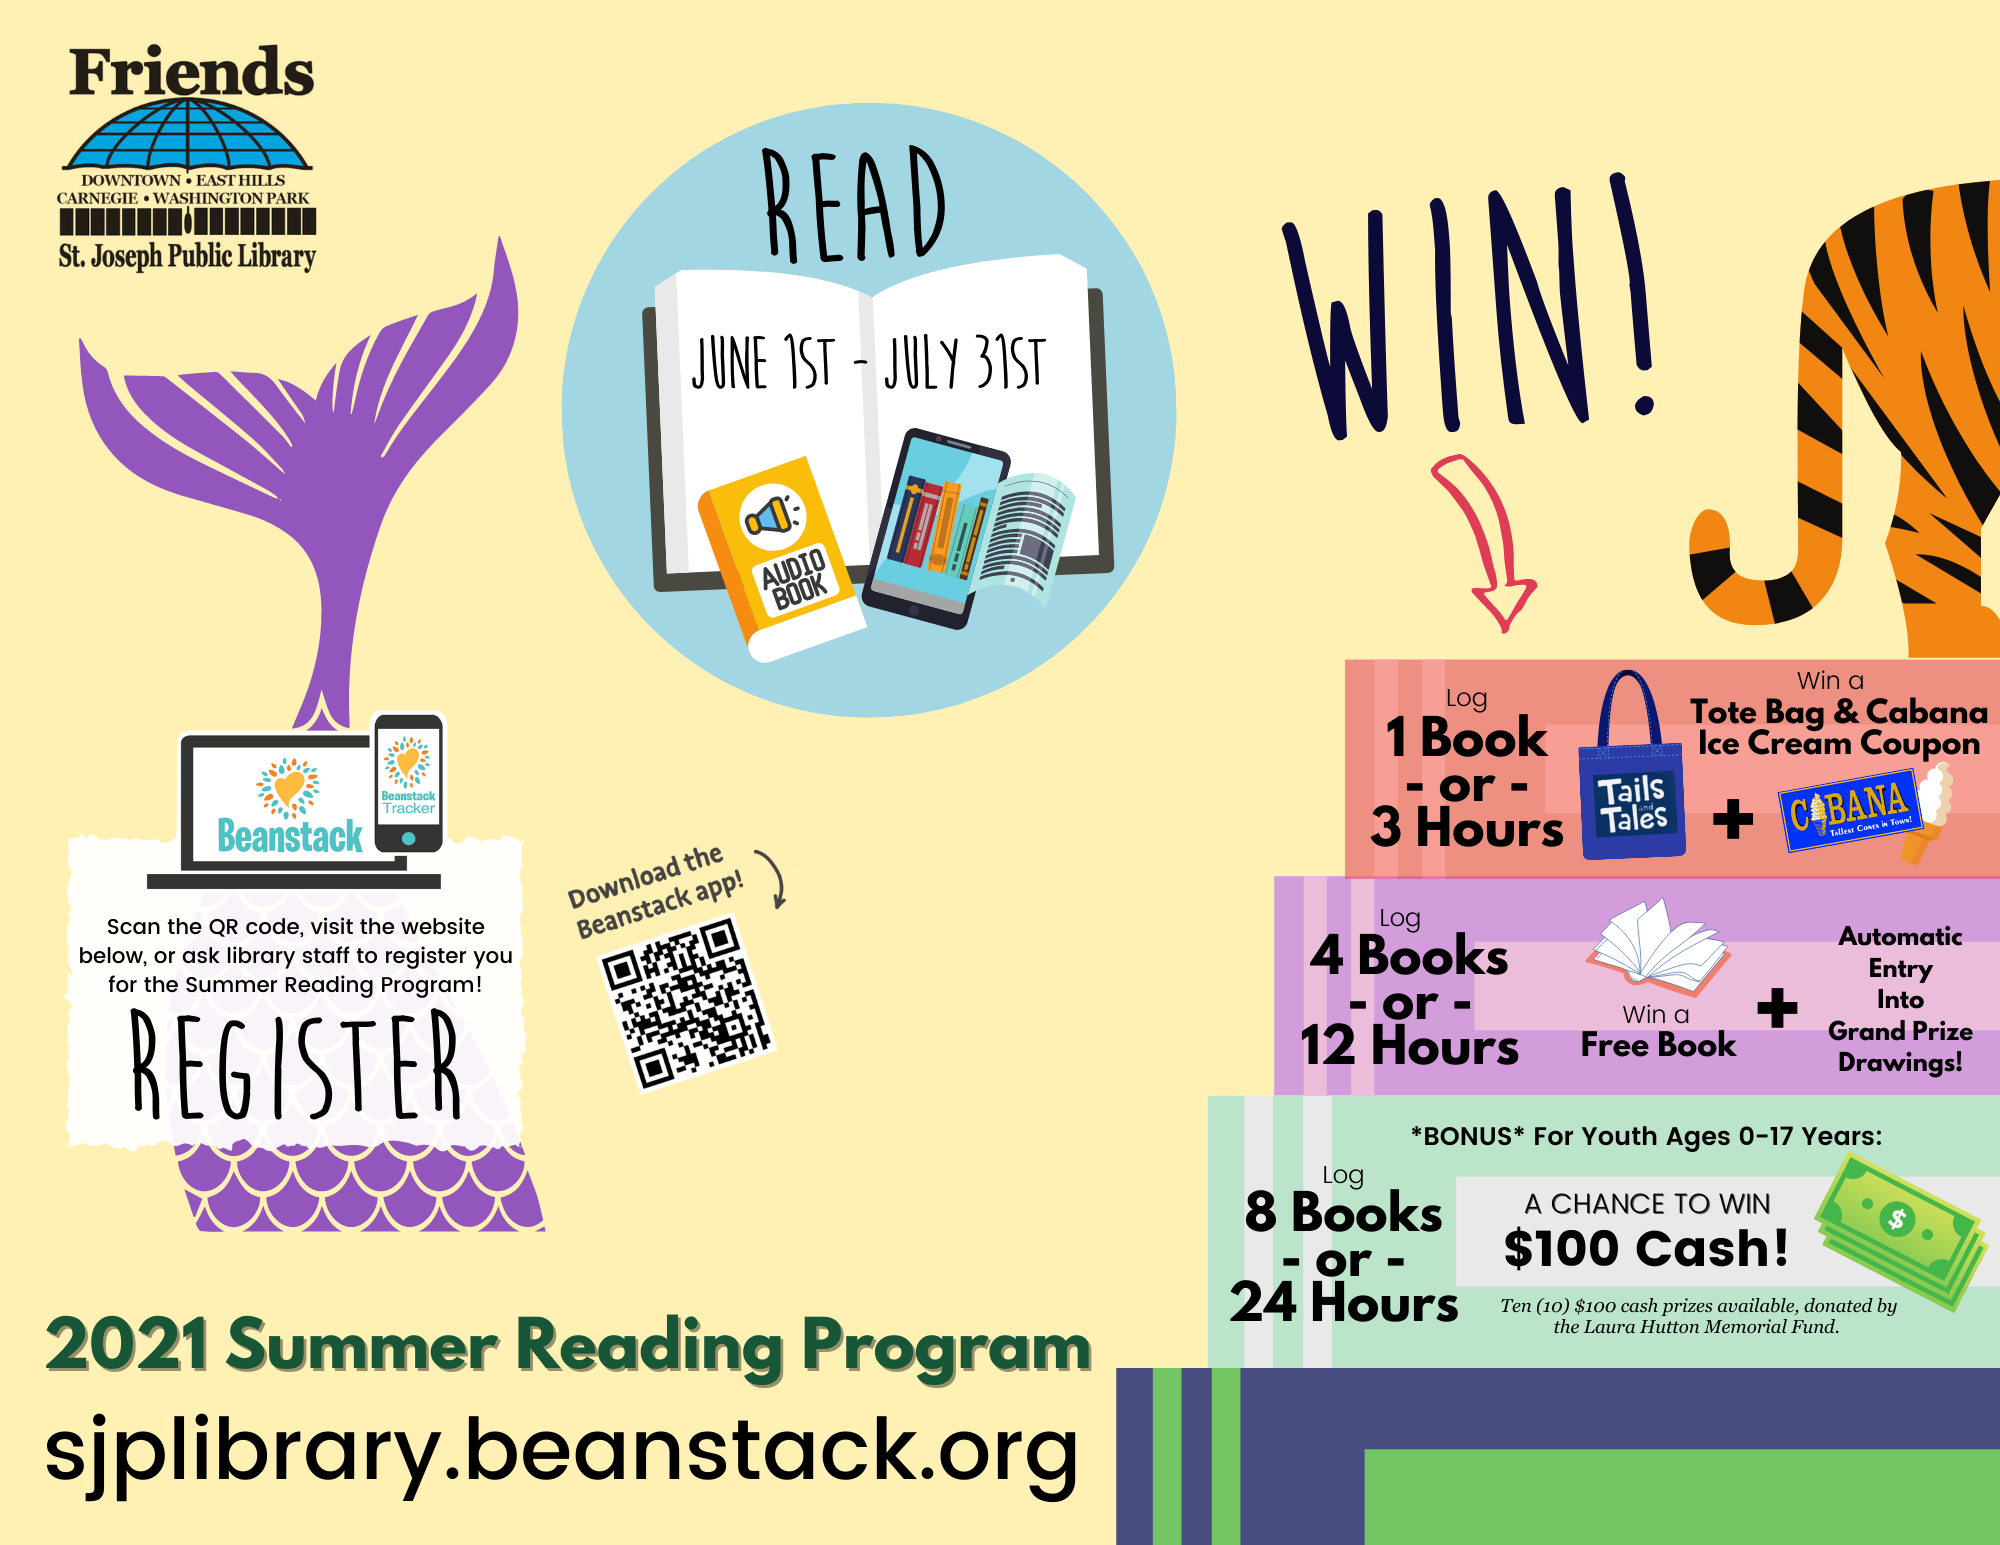 Contact your local public library for more information about summer reading program prizes!